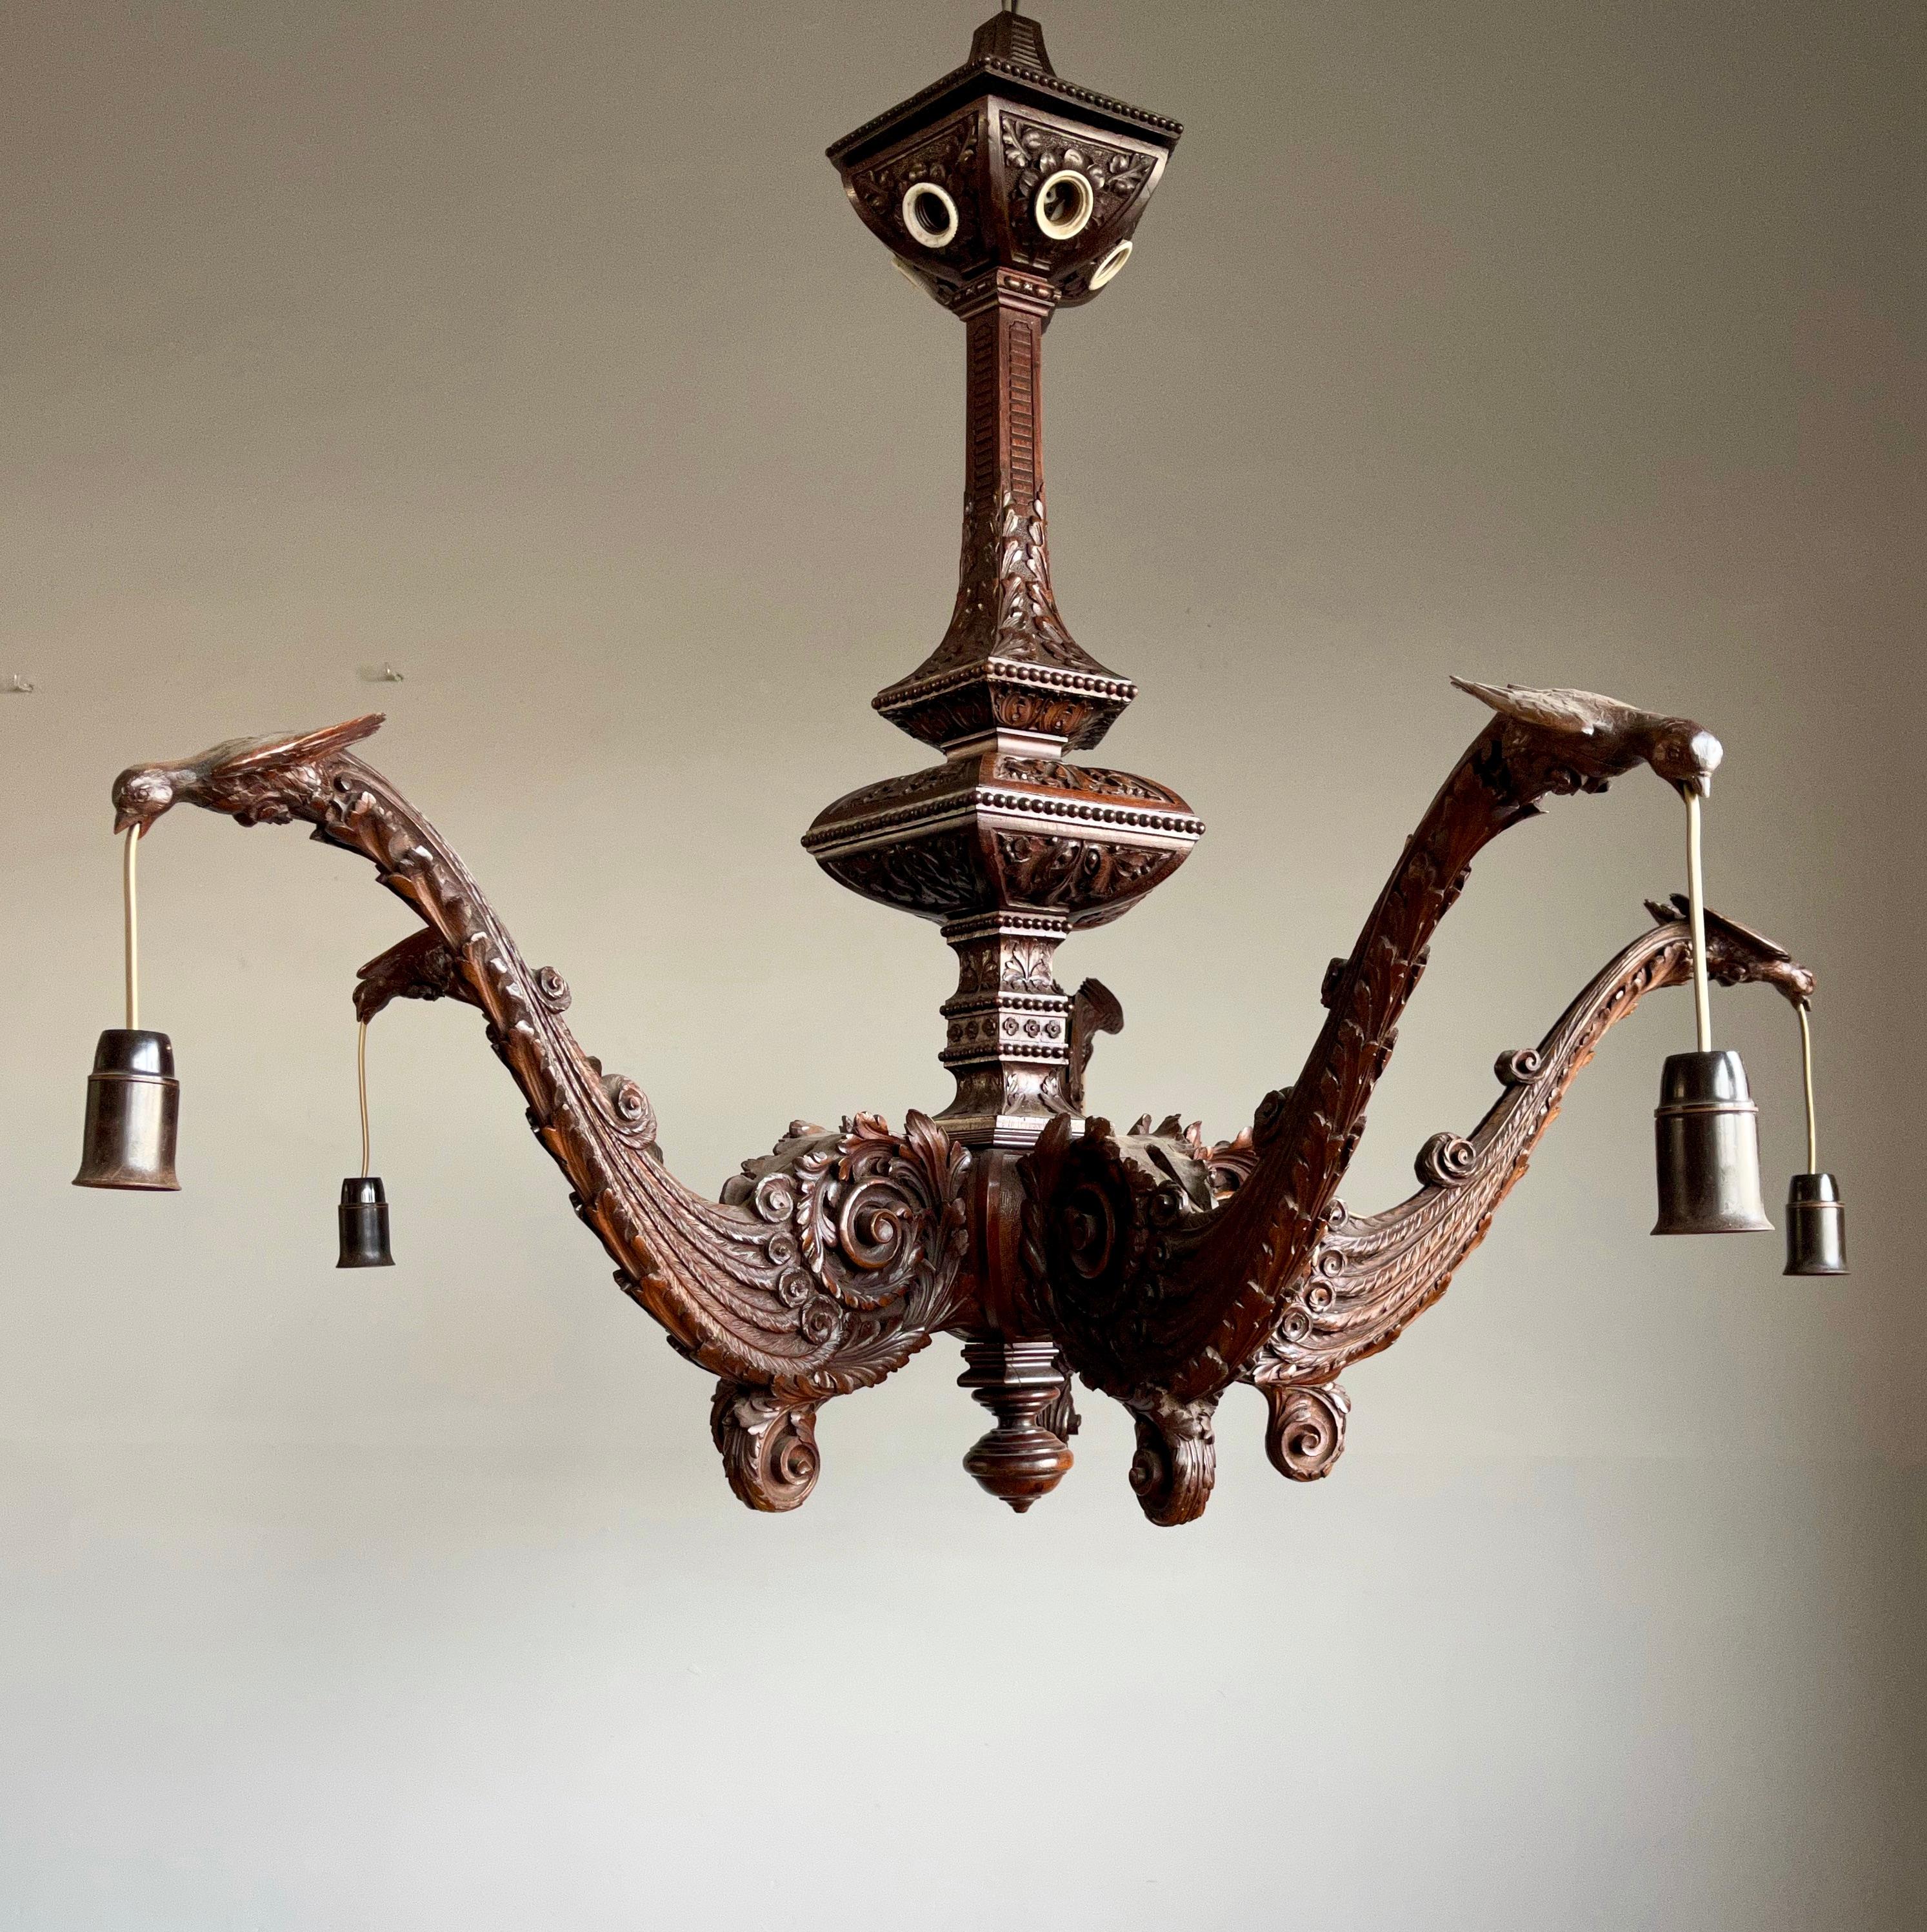 This impressive large and all hand carved wooden pendant light, is a true work of art. It displays the finest quality carving and the skills of its maker. 

It really is incredible how this master carver has managed to carve perfect and very deep